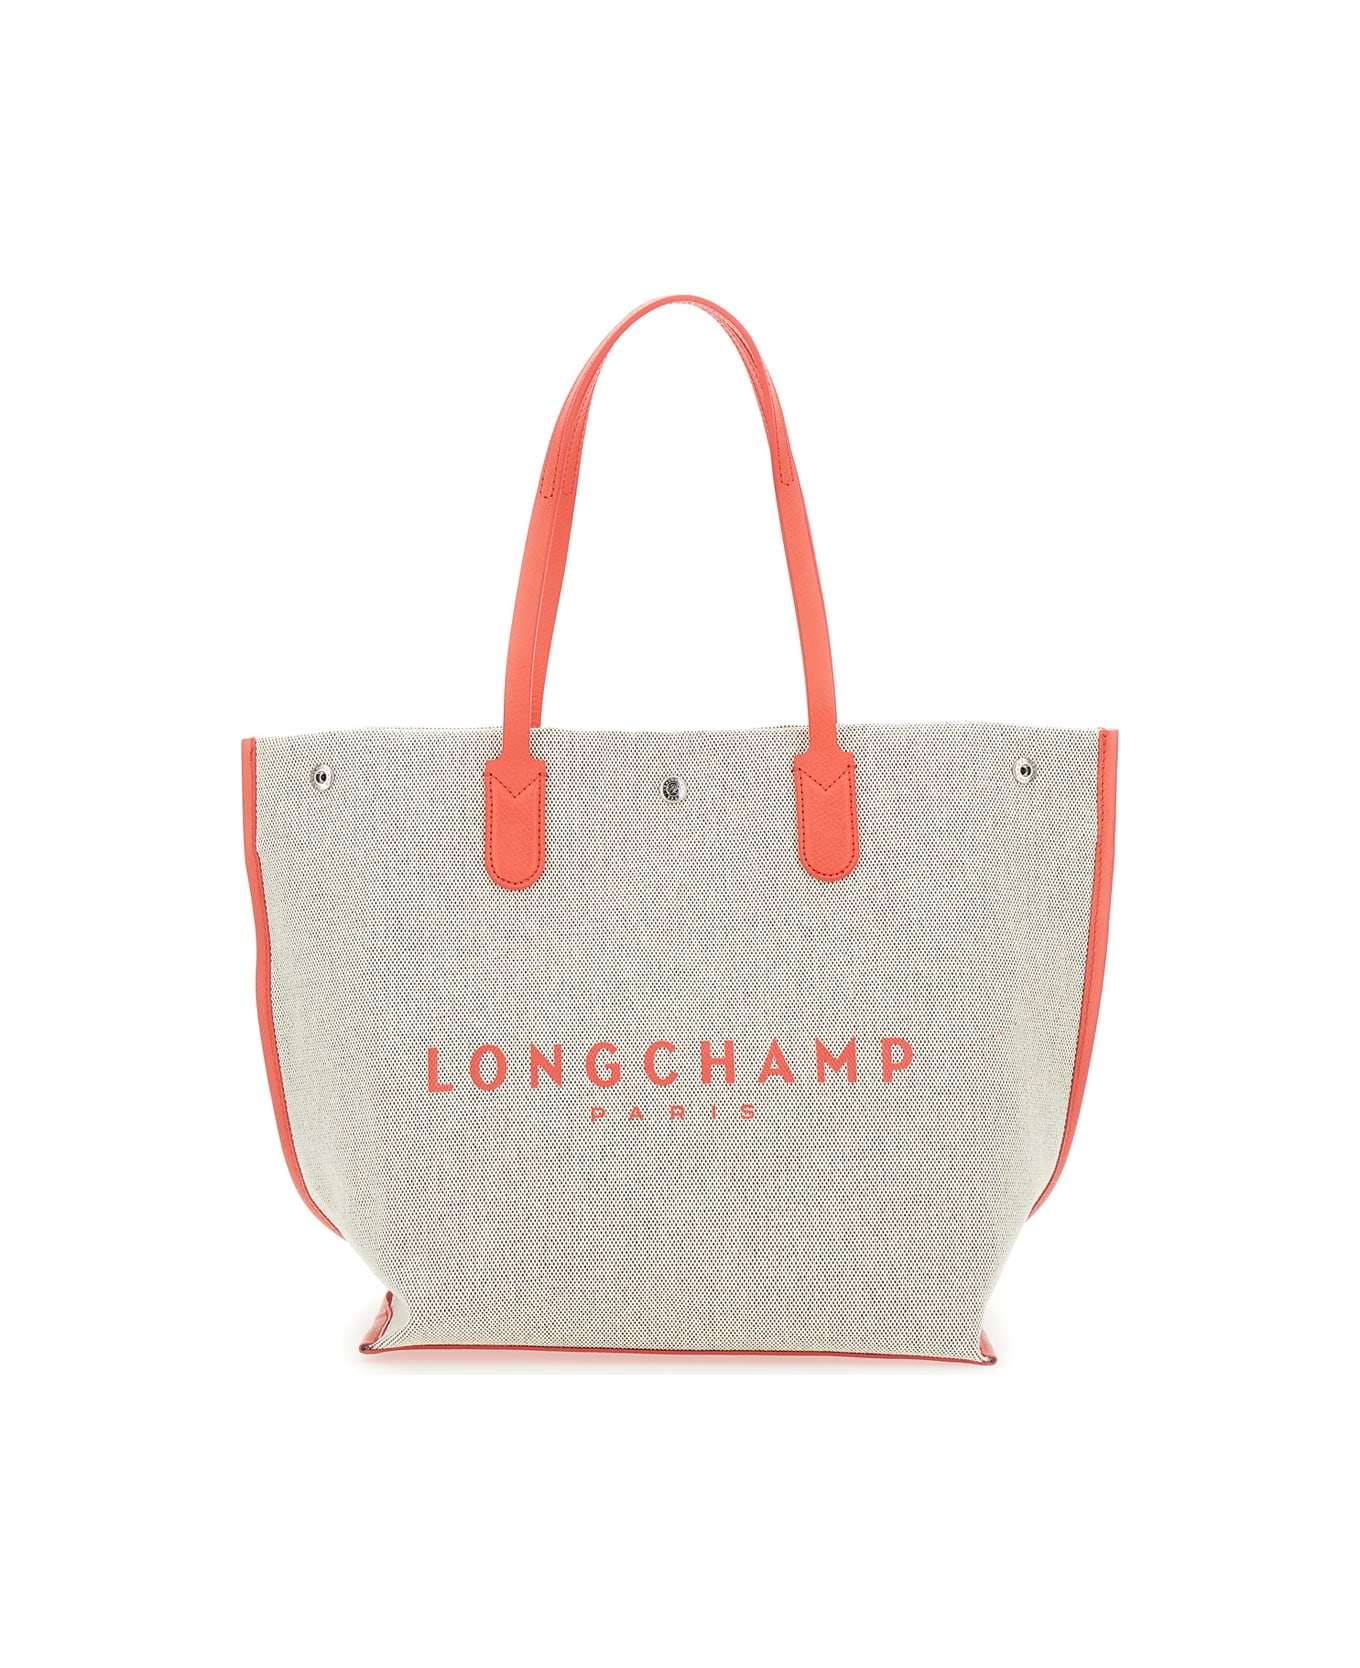 Longchamp 'roseau' Beige Tote Bag With Logo Print In Cotton Canvas Woman - Beige